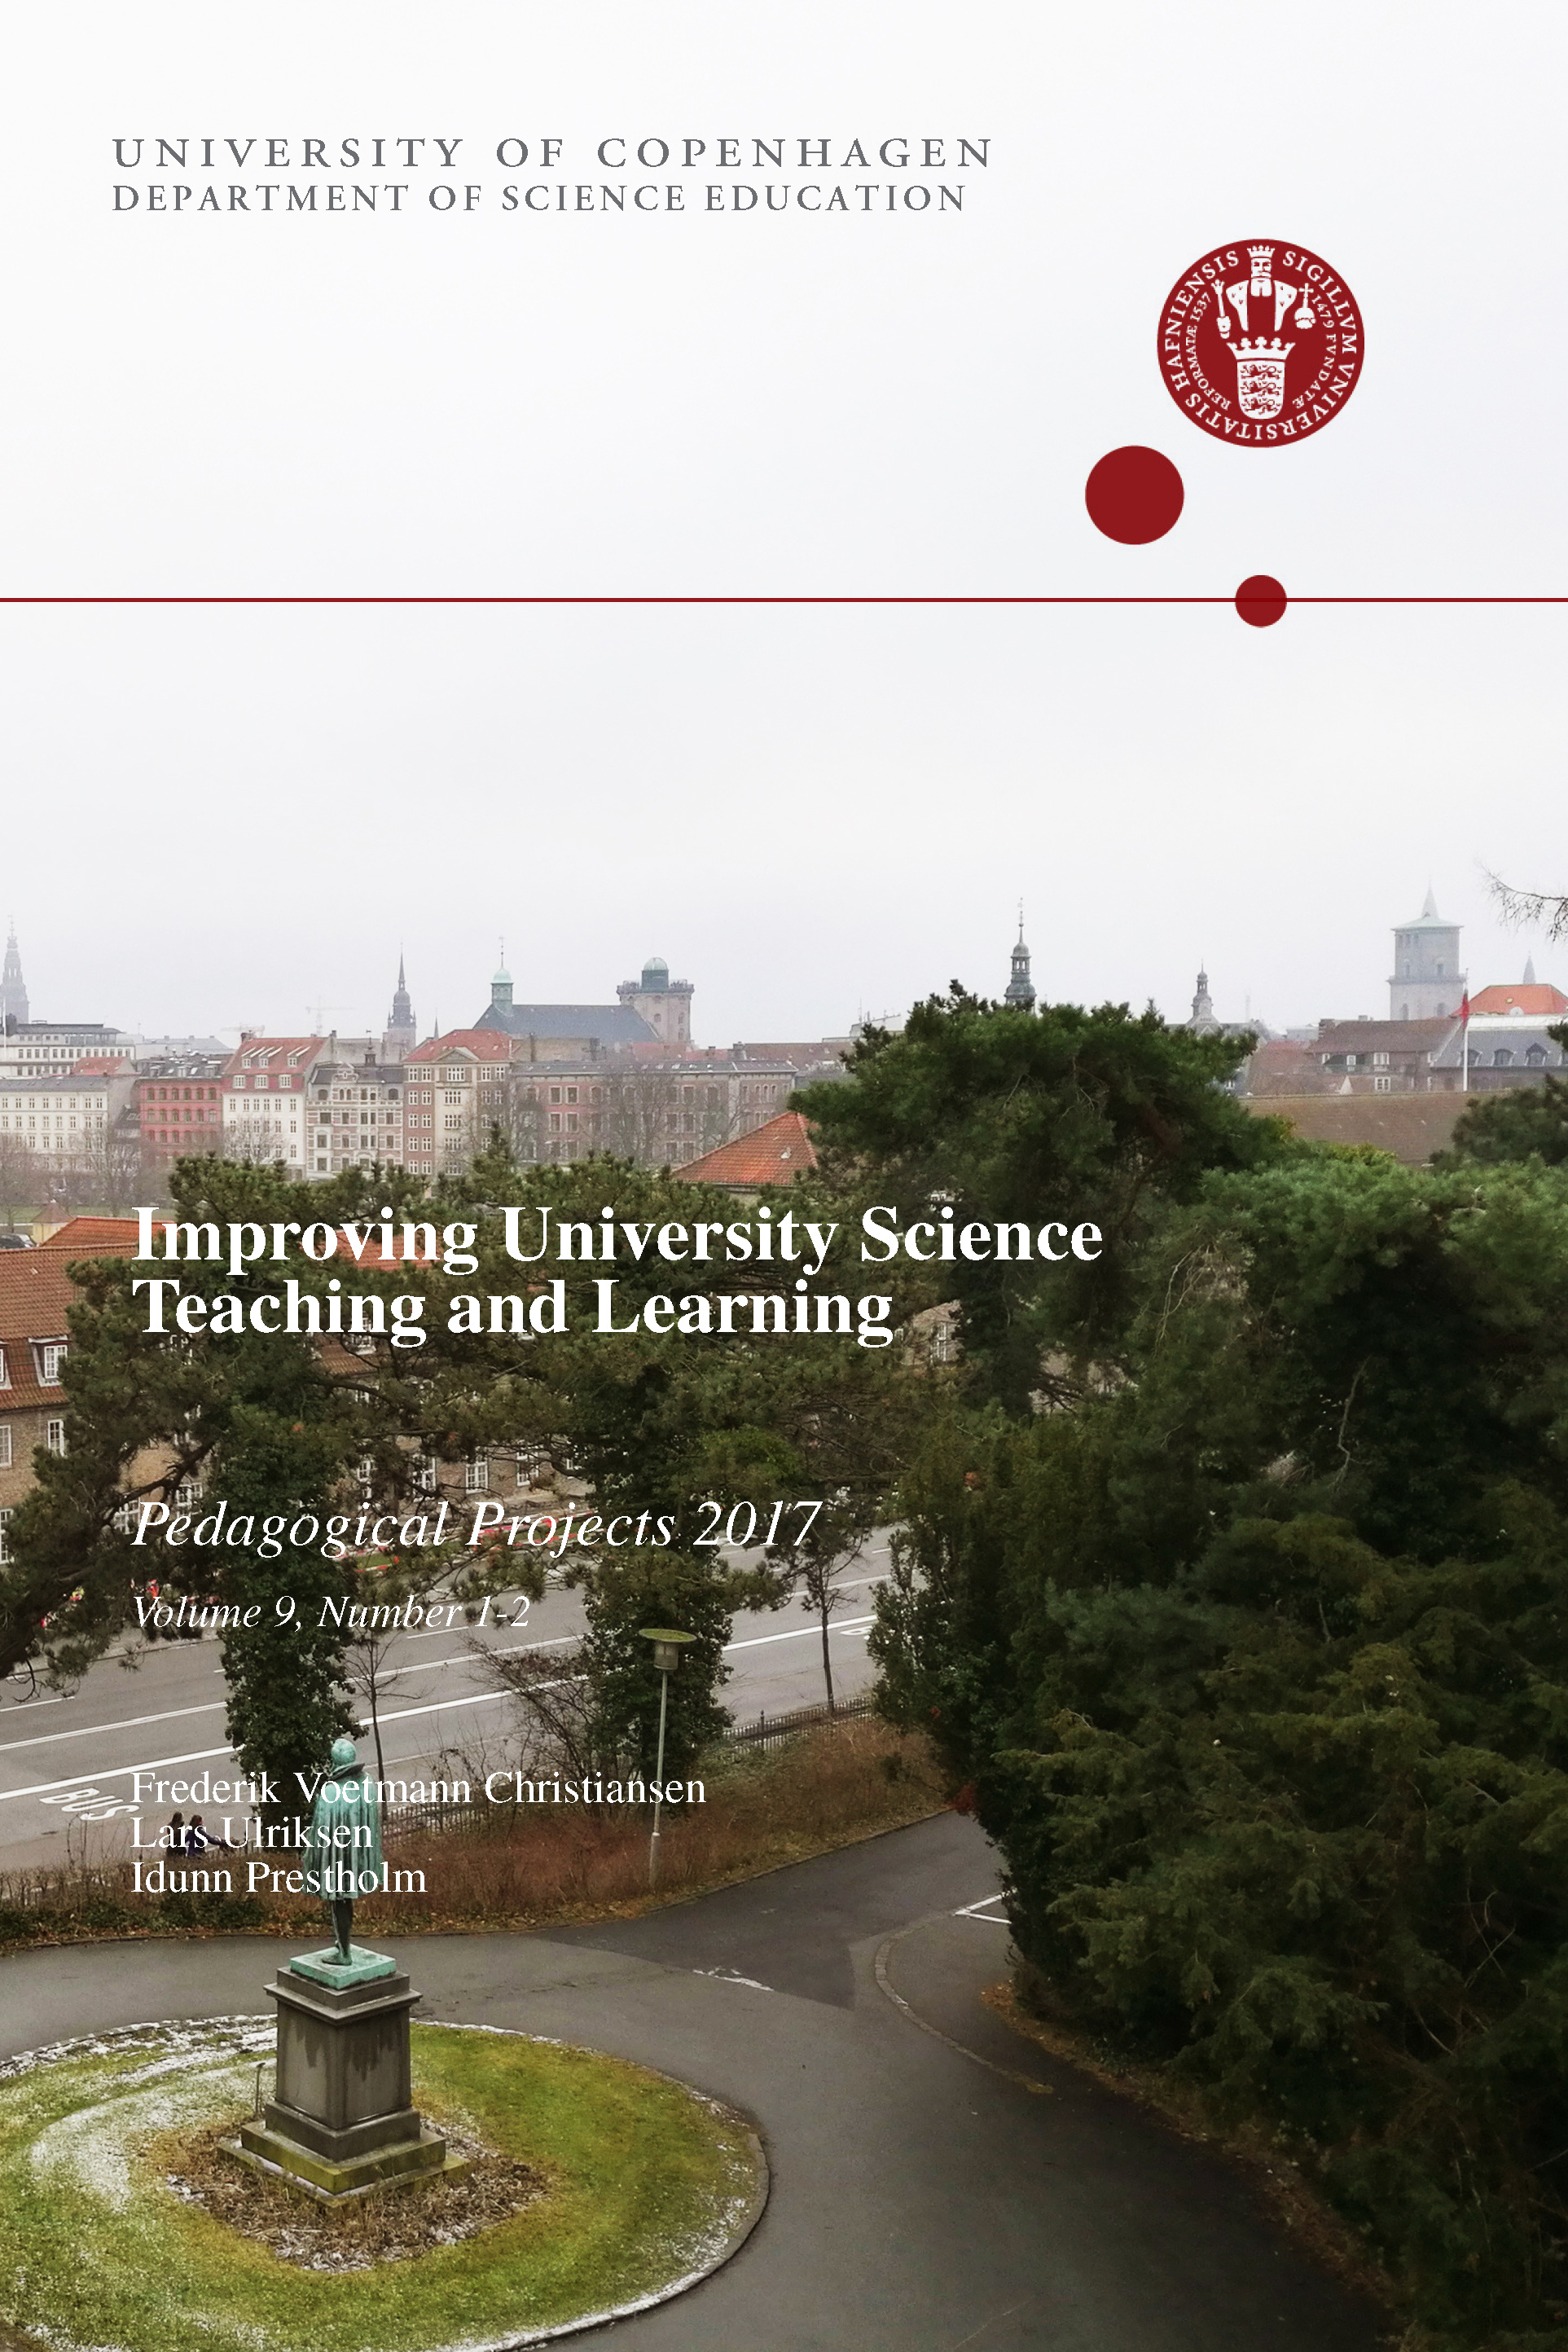 					View Vol. 9 No. 1-2 (2017): Improving University Science Teaching and Learning - Pedagogical Projects 2017
				